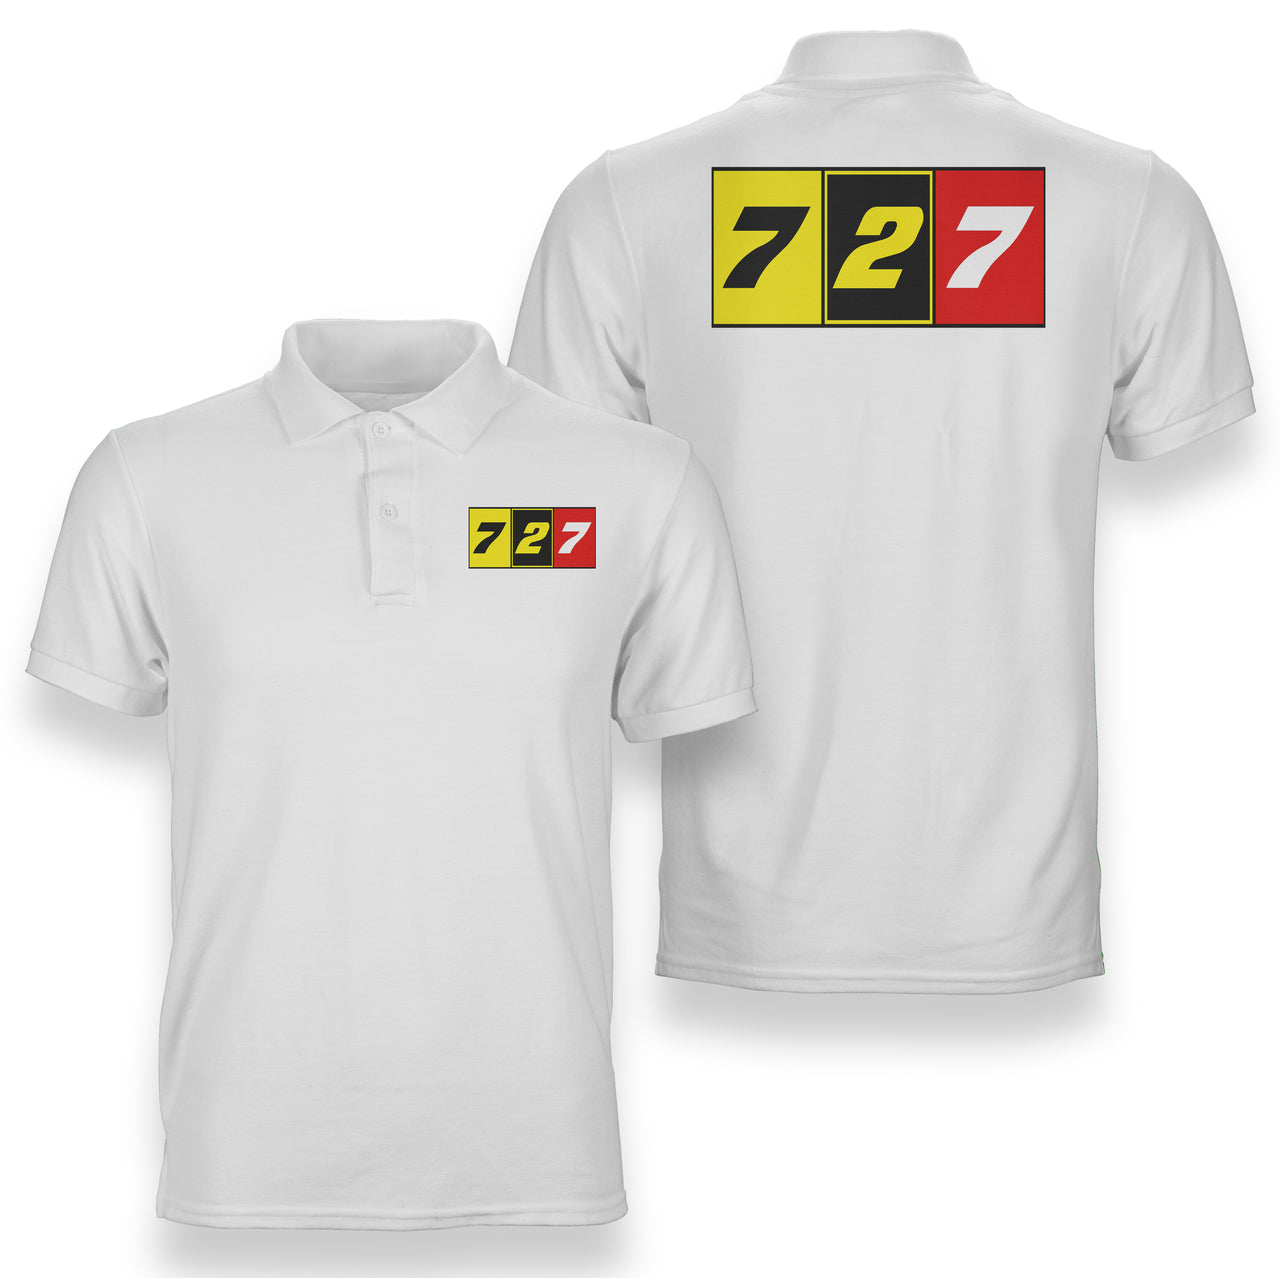 Flat Colourful 727 Designed Double Side Polo T-Shirts